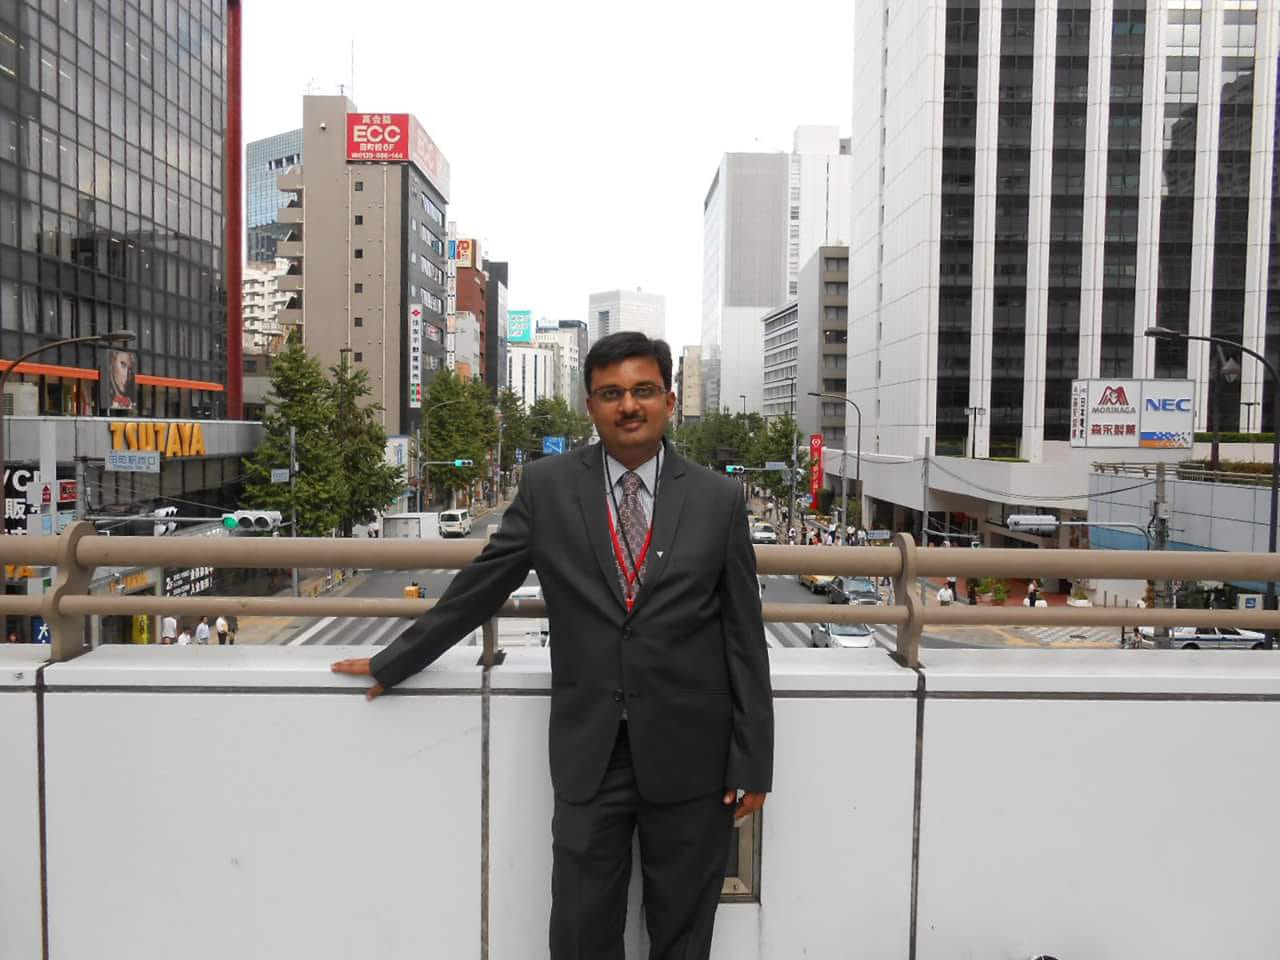 Hardik's trip to Japan to learn about waste and recycling